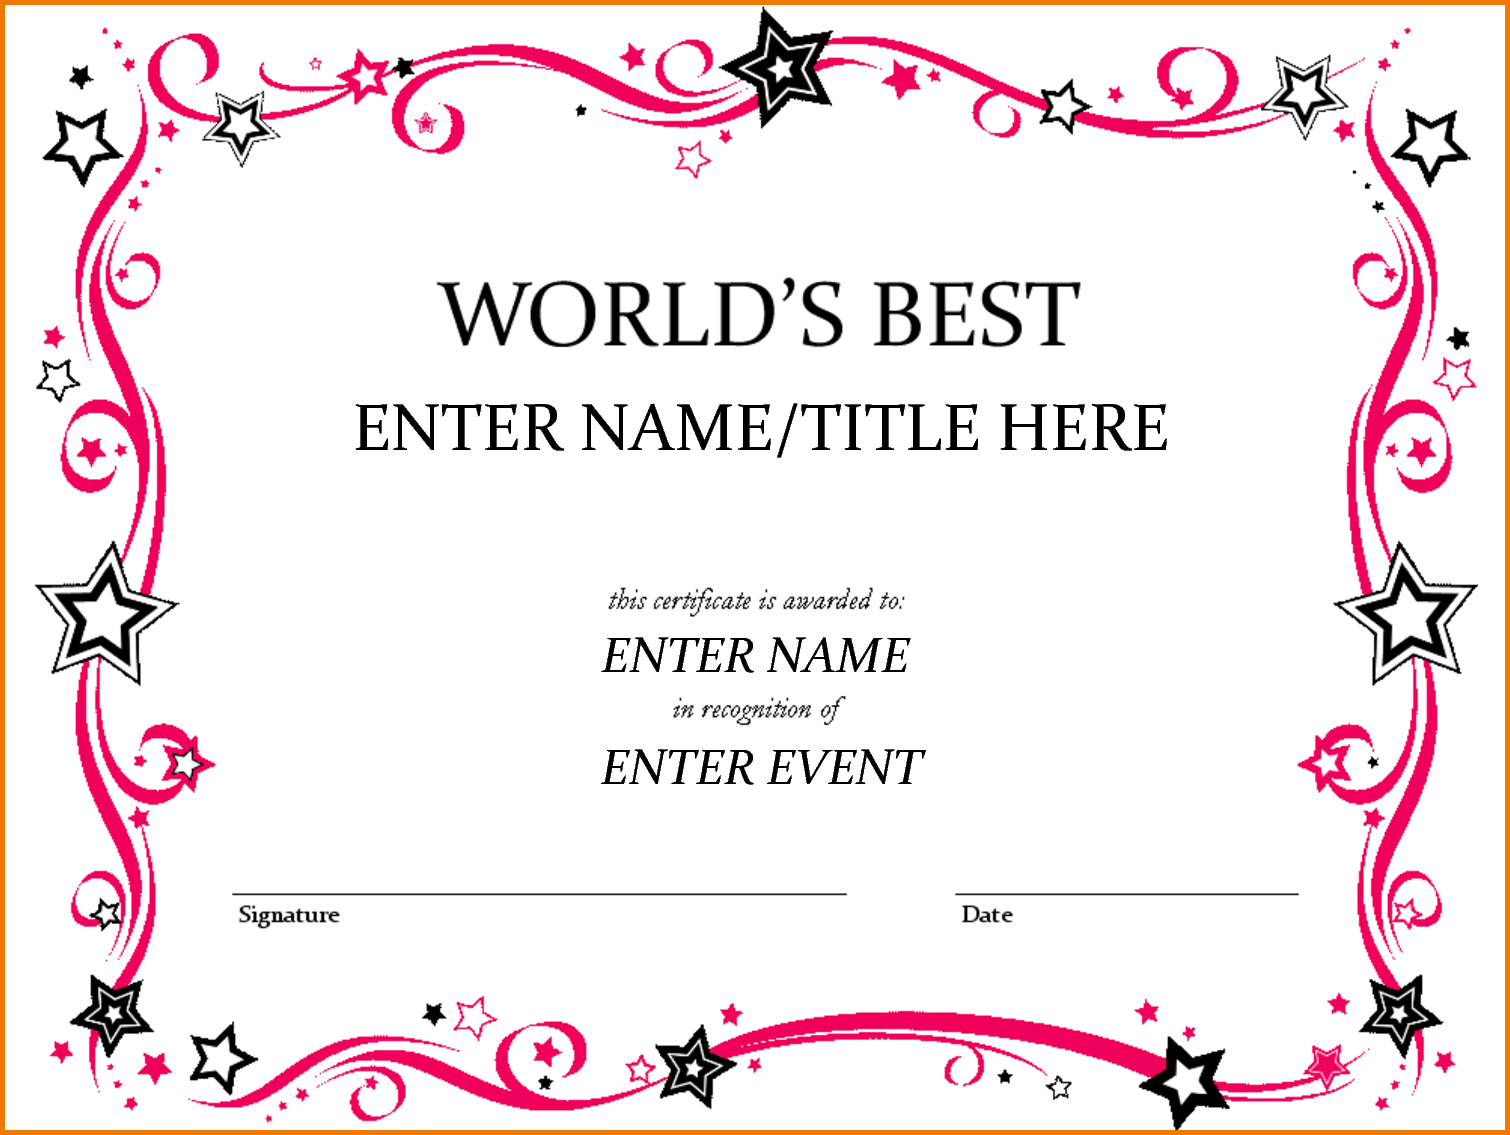 Award Template Word | Authorization Letter Pdf Inside Blank Award Certificate Templates Word